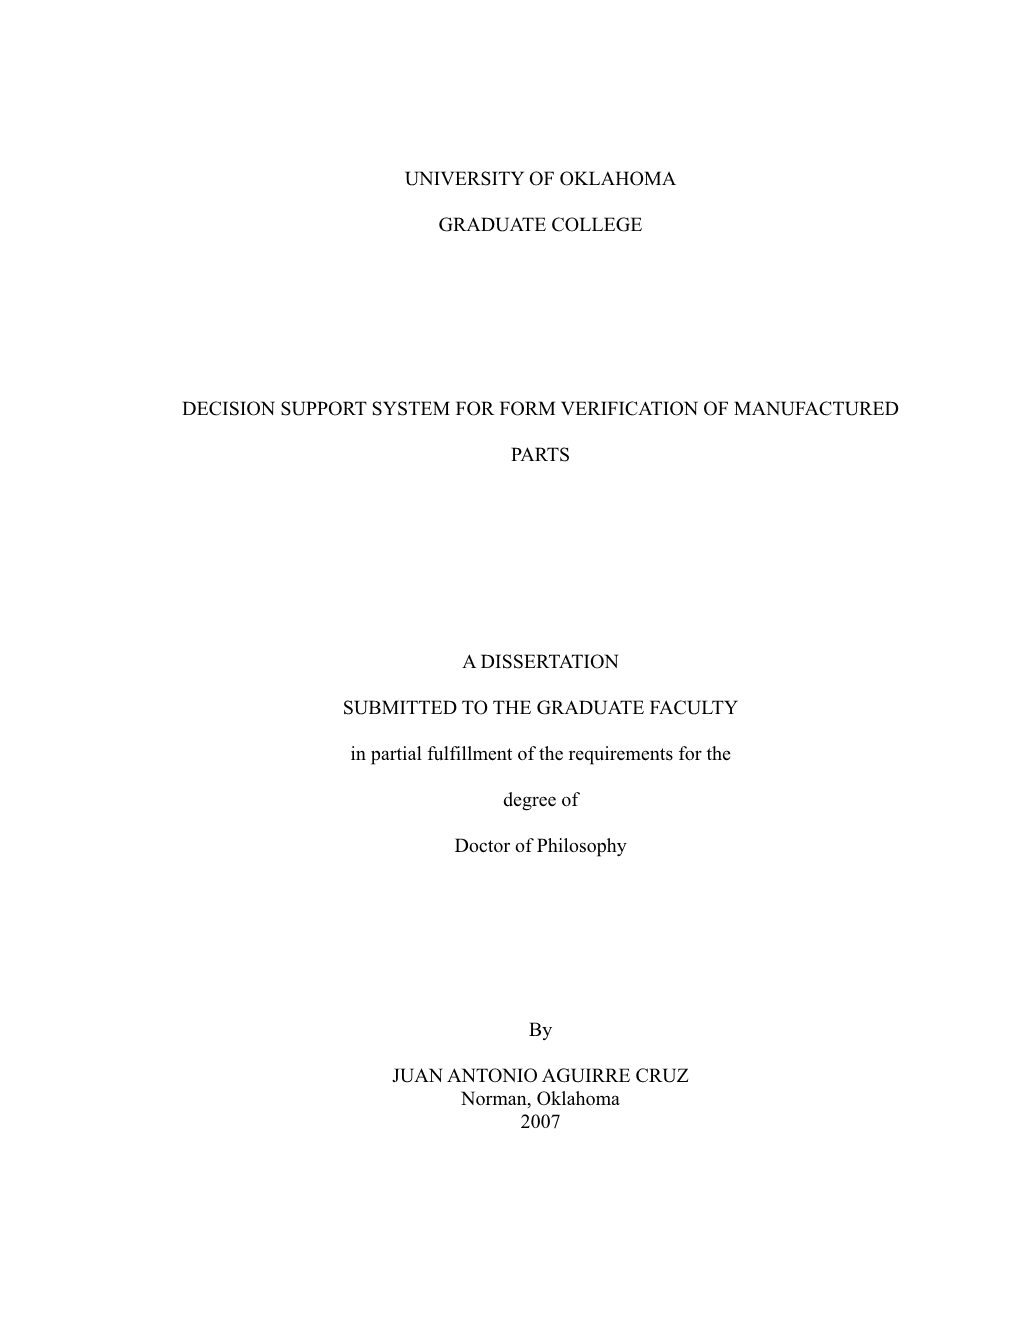 University of Oklahoma Graduate College Decision Support System for Form Verification of Manufactured Parts a Dissertation Submi